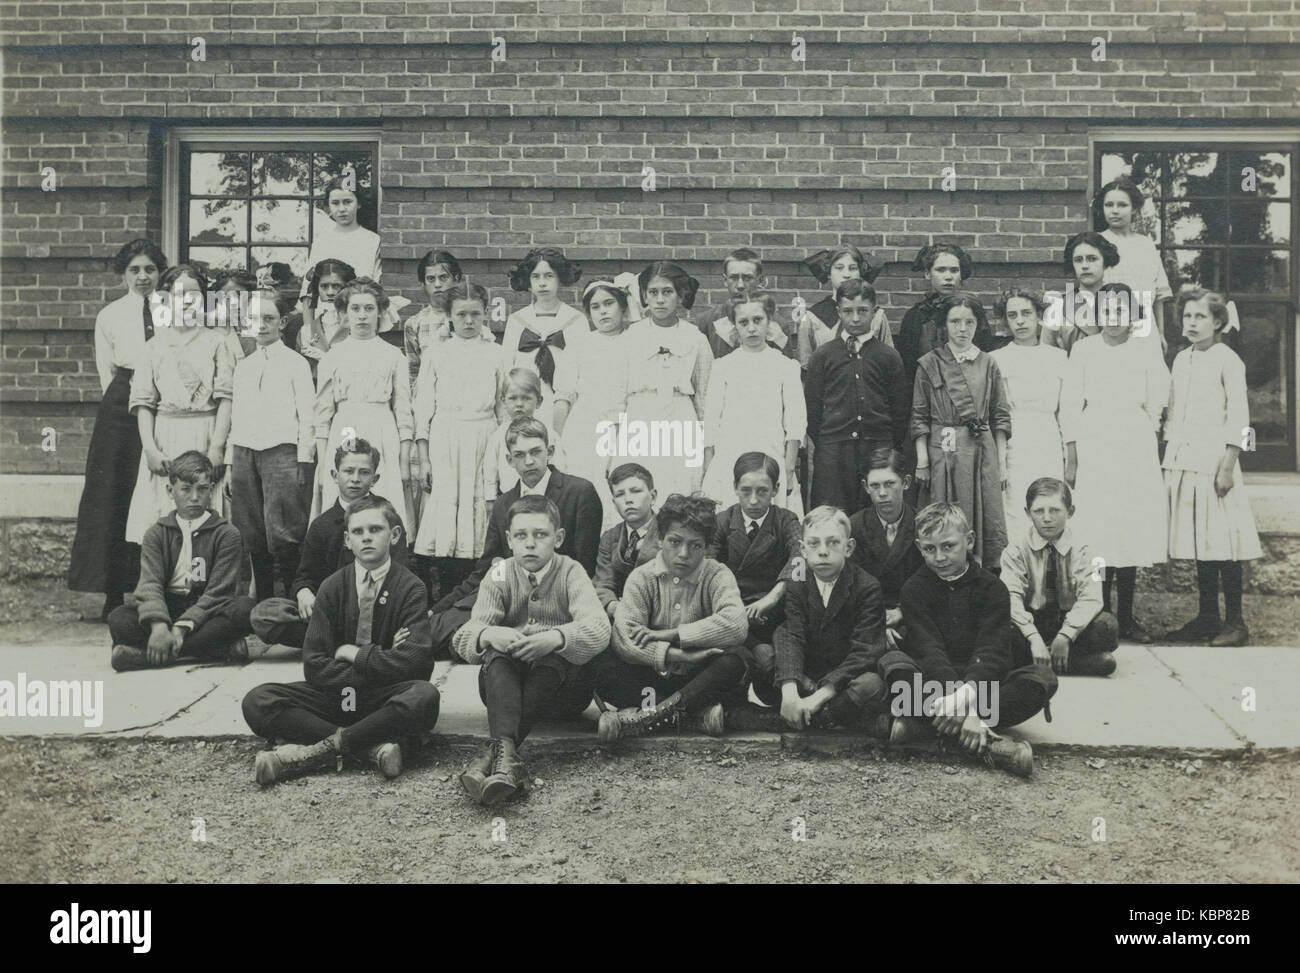 American archive monochrome photograph of class of school children and teacher, with school building, taken in the early 20th century in Port Byron, NY, USA Stock Photo